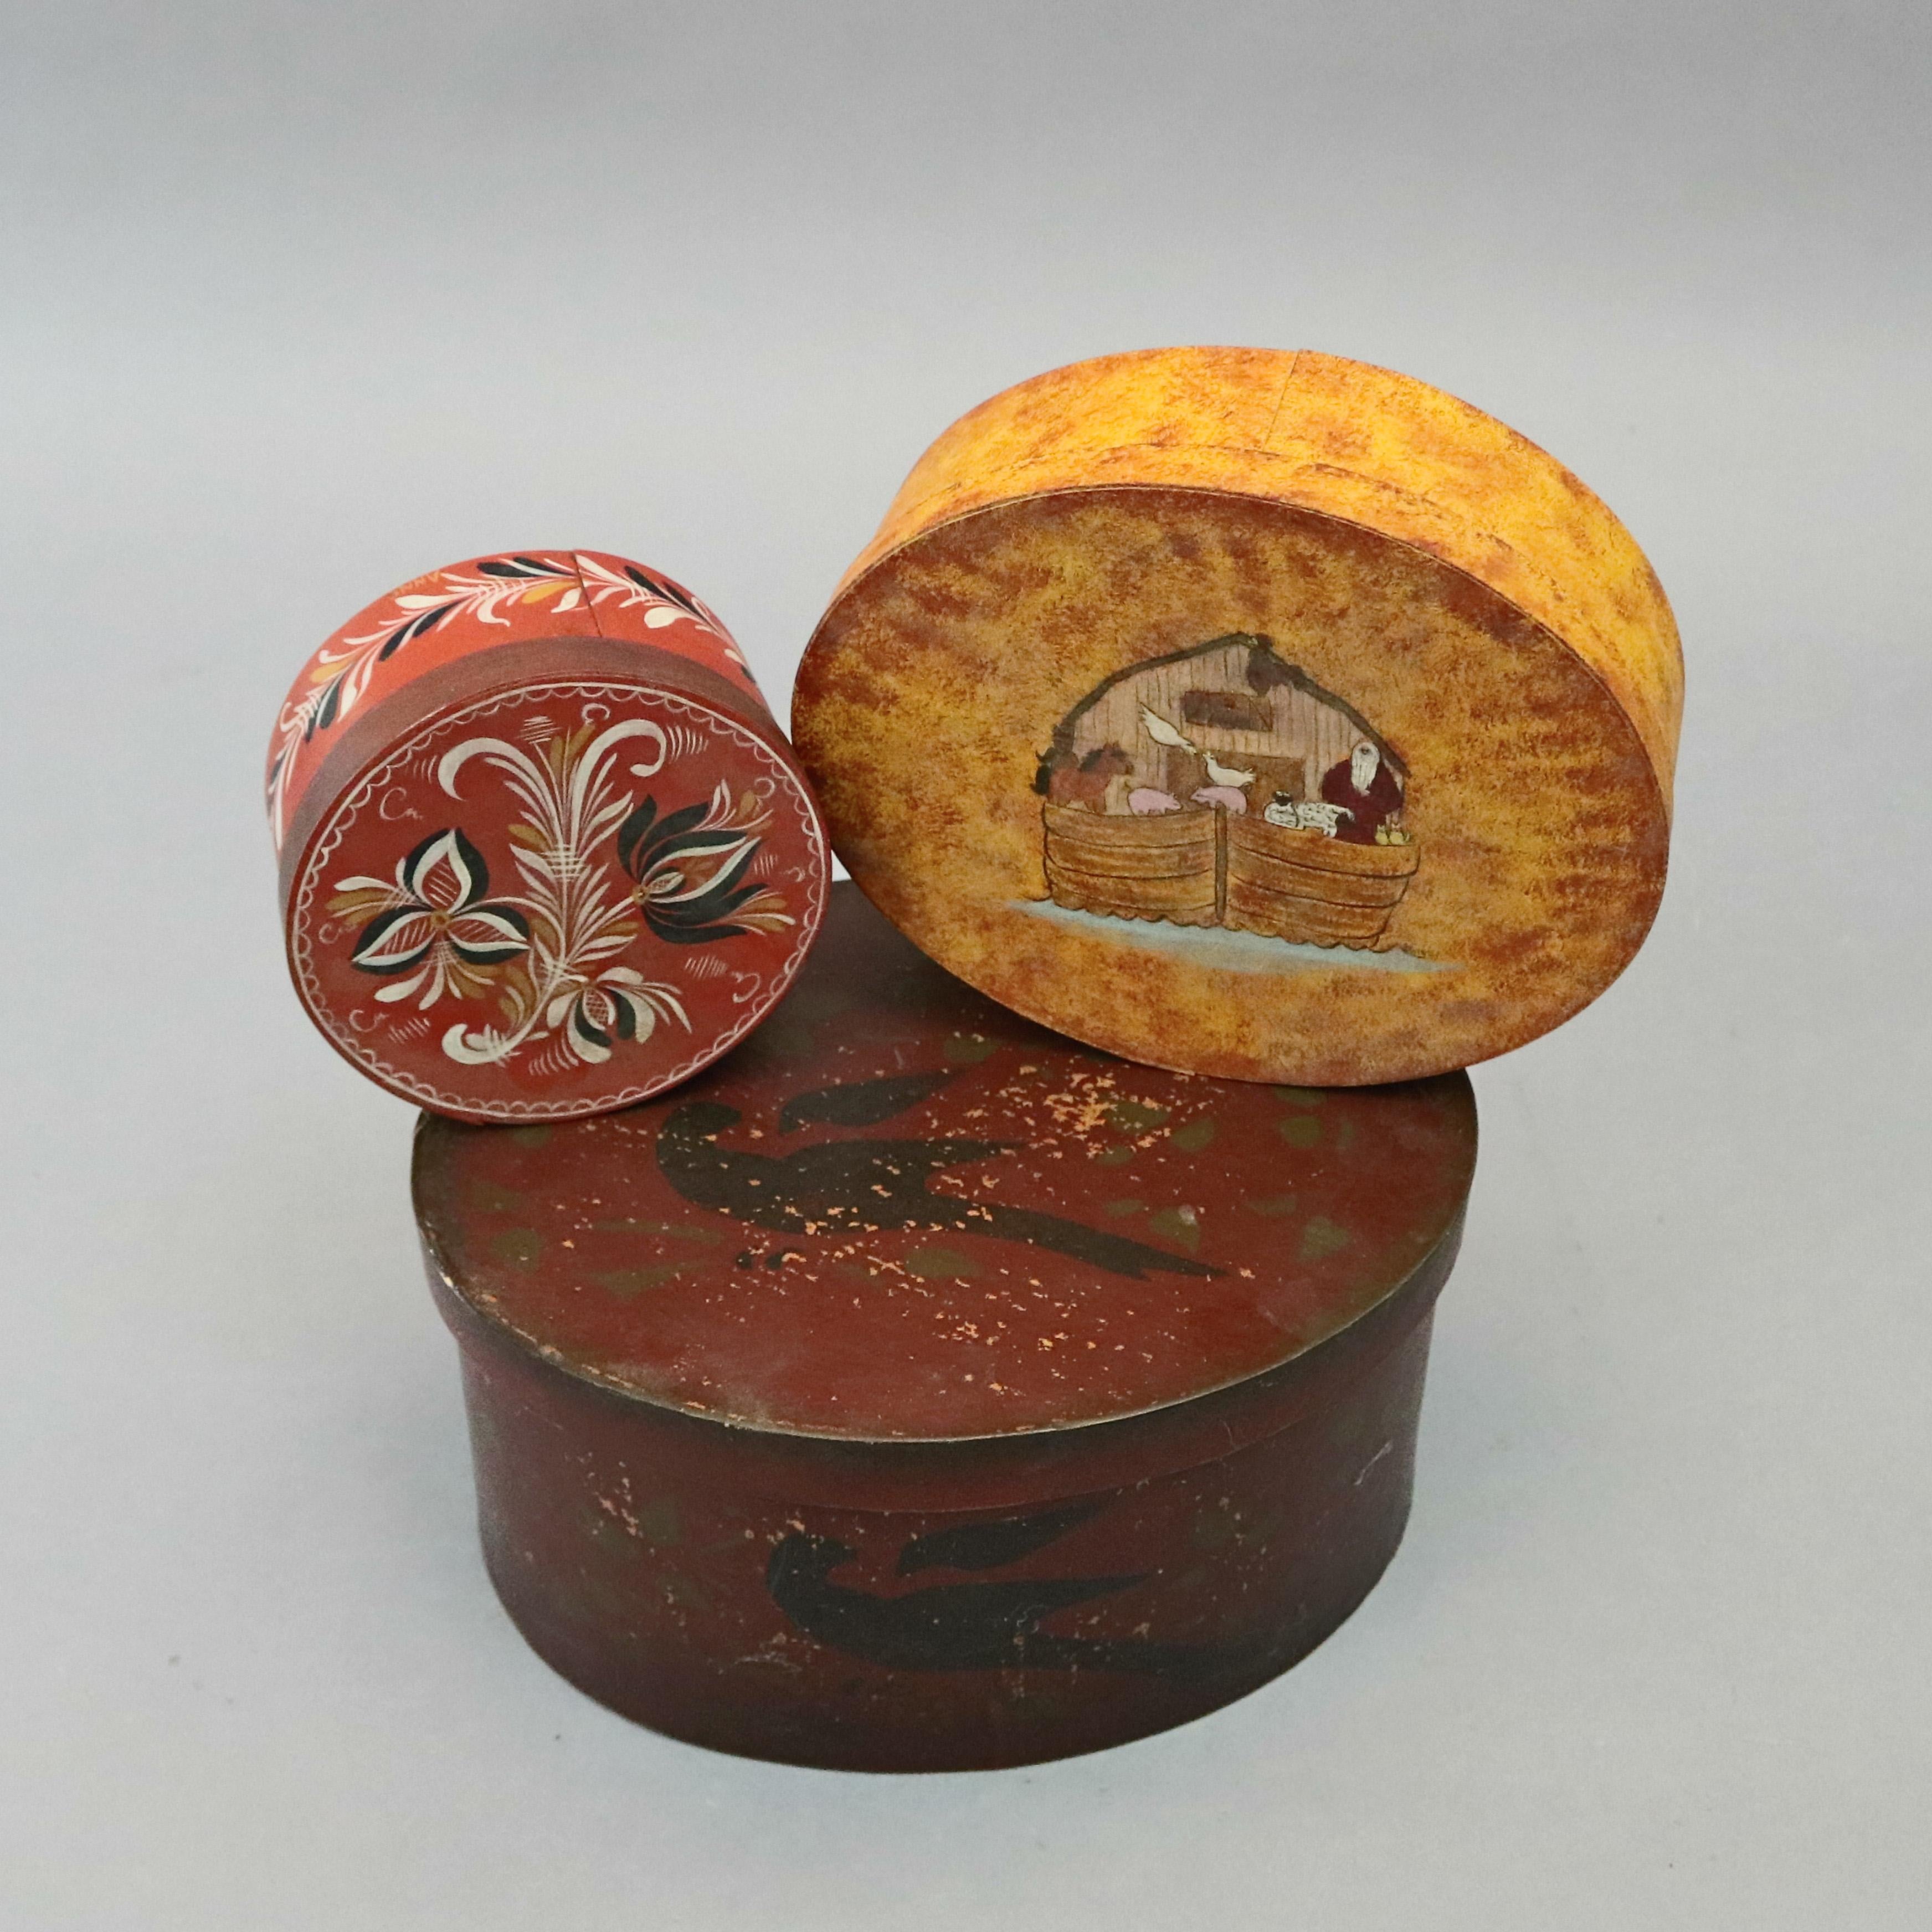 Three Lesher School Shaker boxes offer bentwood maple and birch pegged construction in oval form with Gothic-shaped finger joints (swallowtails) finished in copper tacks, paint decorated in Folk Art designs including black bird, Noah's Ark and